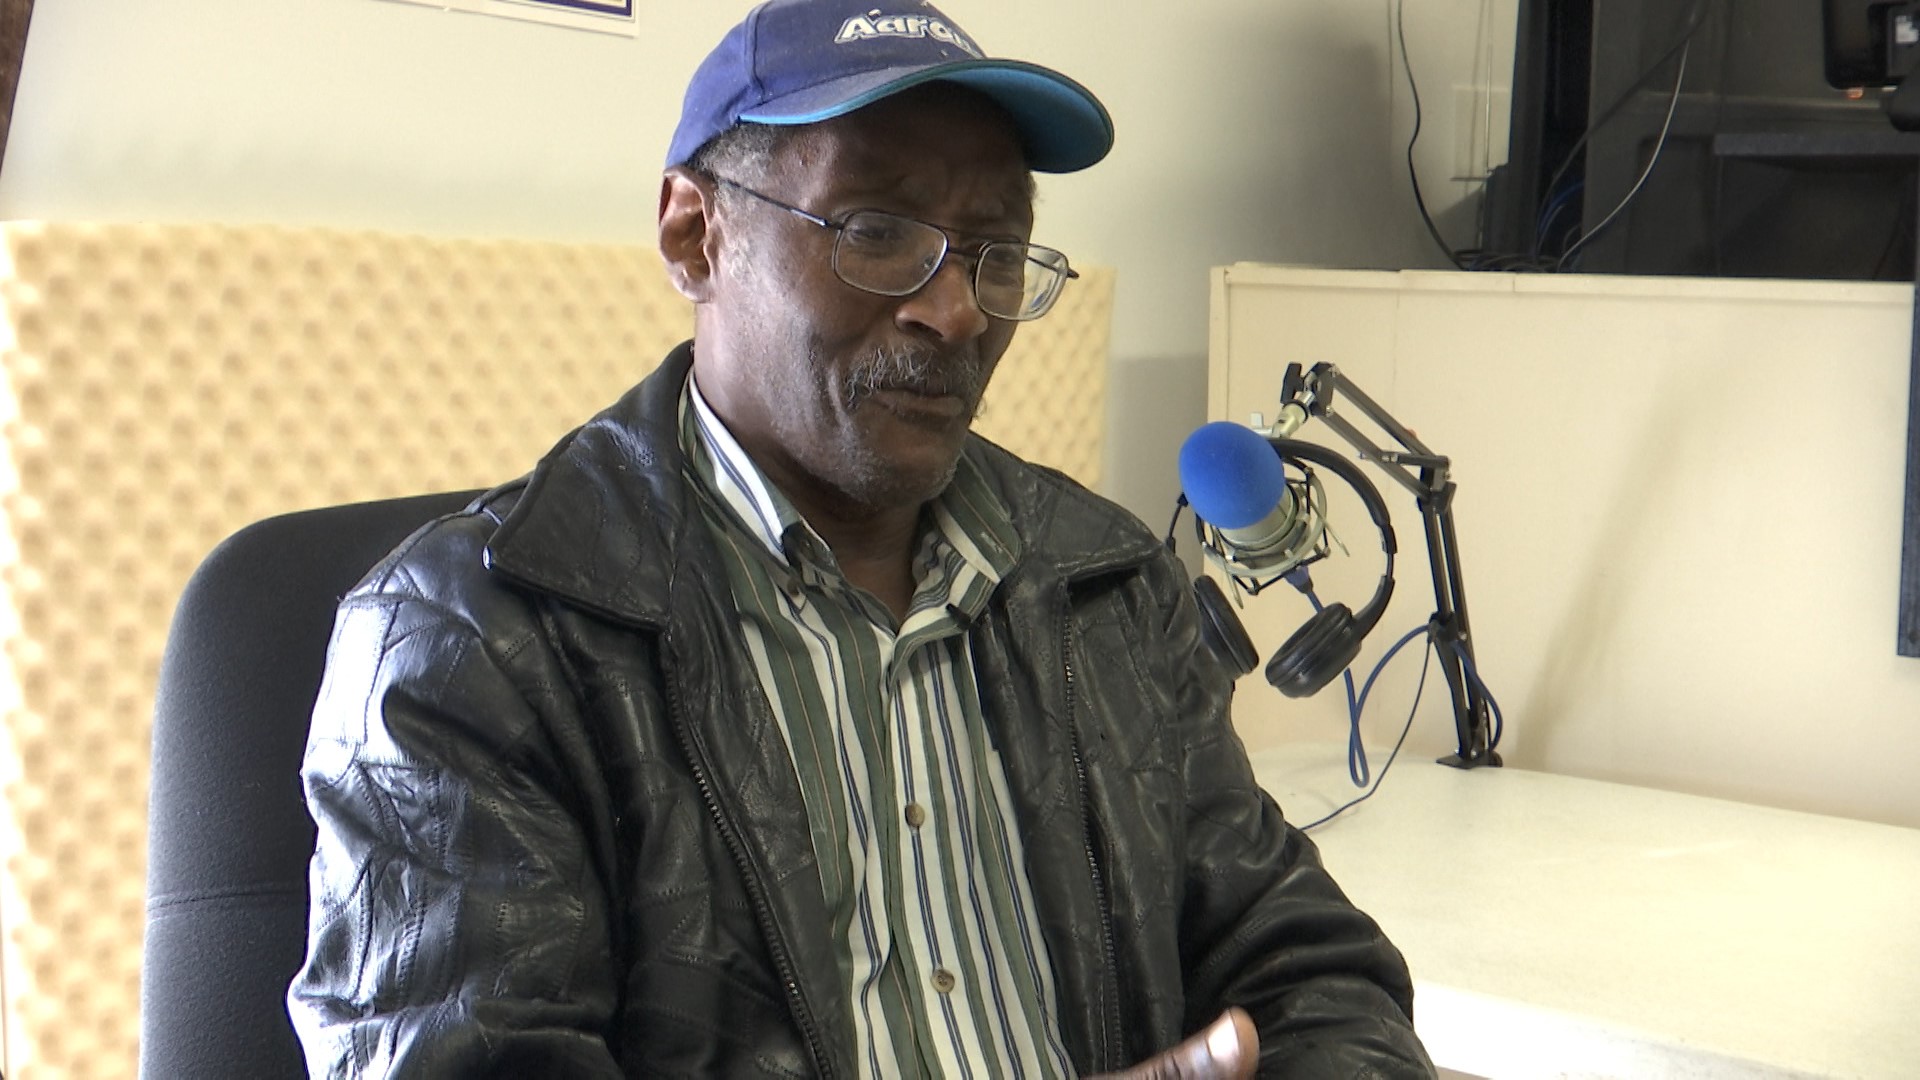 Reverend Walter Peavy with WDJL says the experience with an alleged scammer shows the gospel station is about much, much more than money.